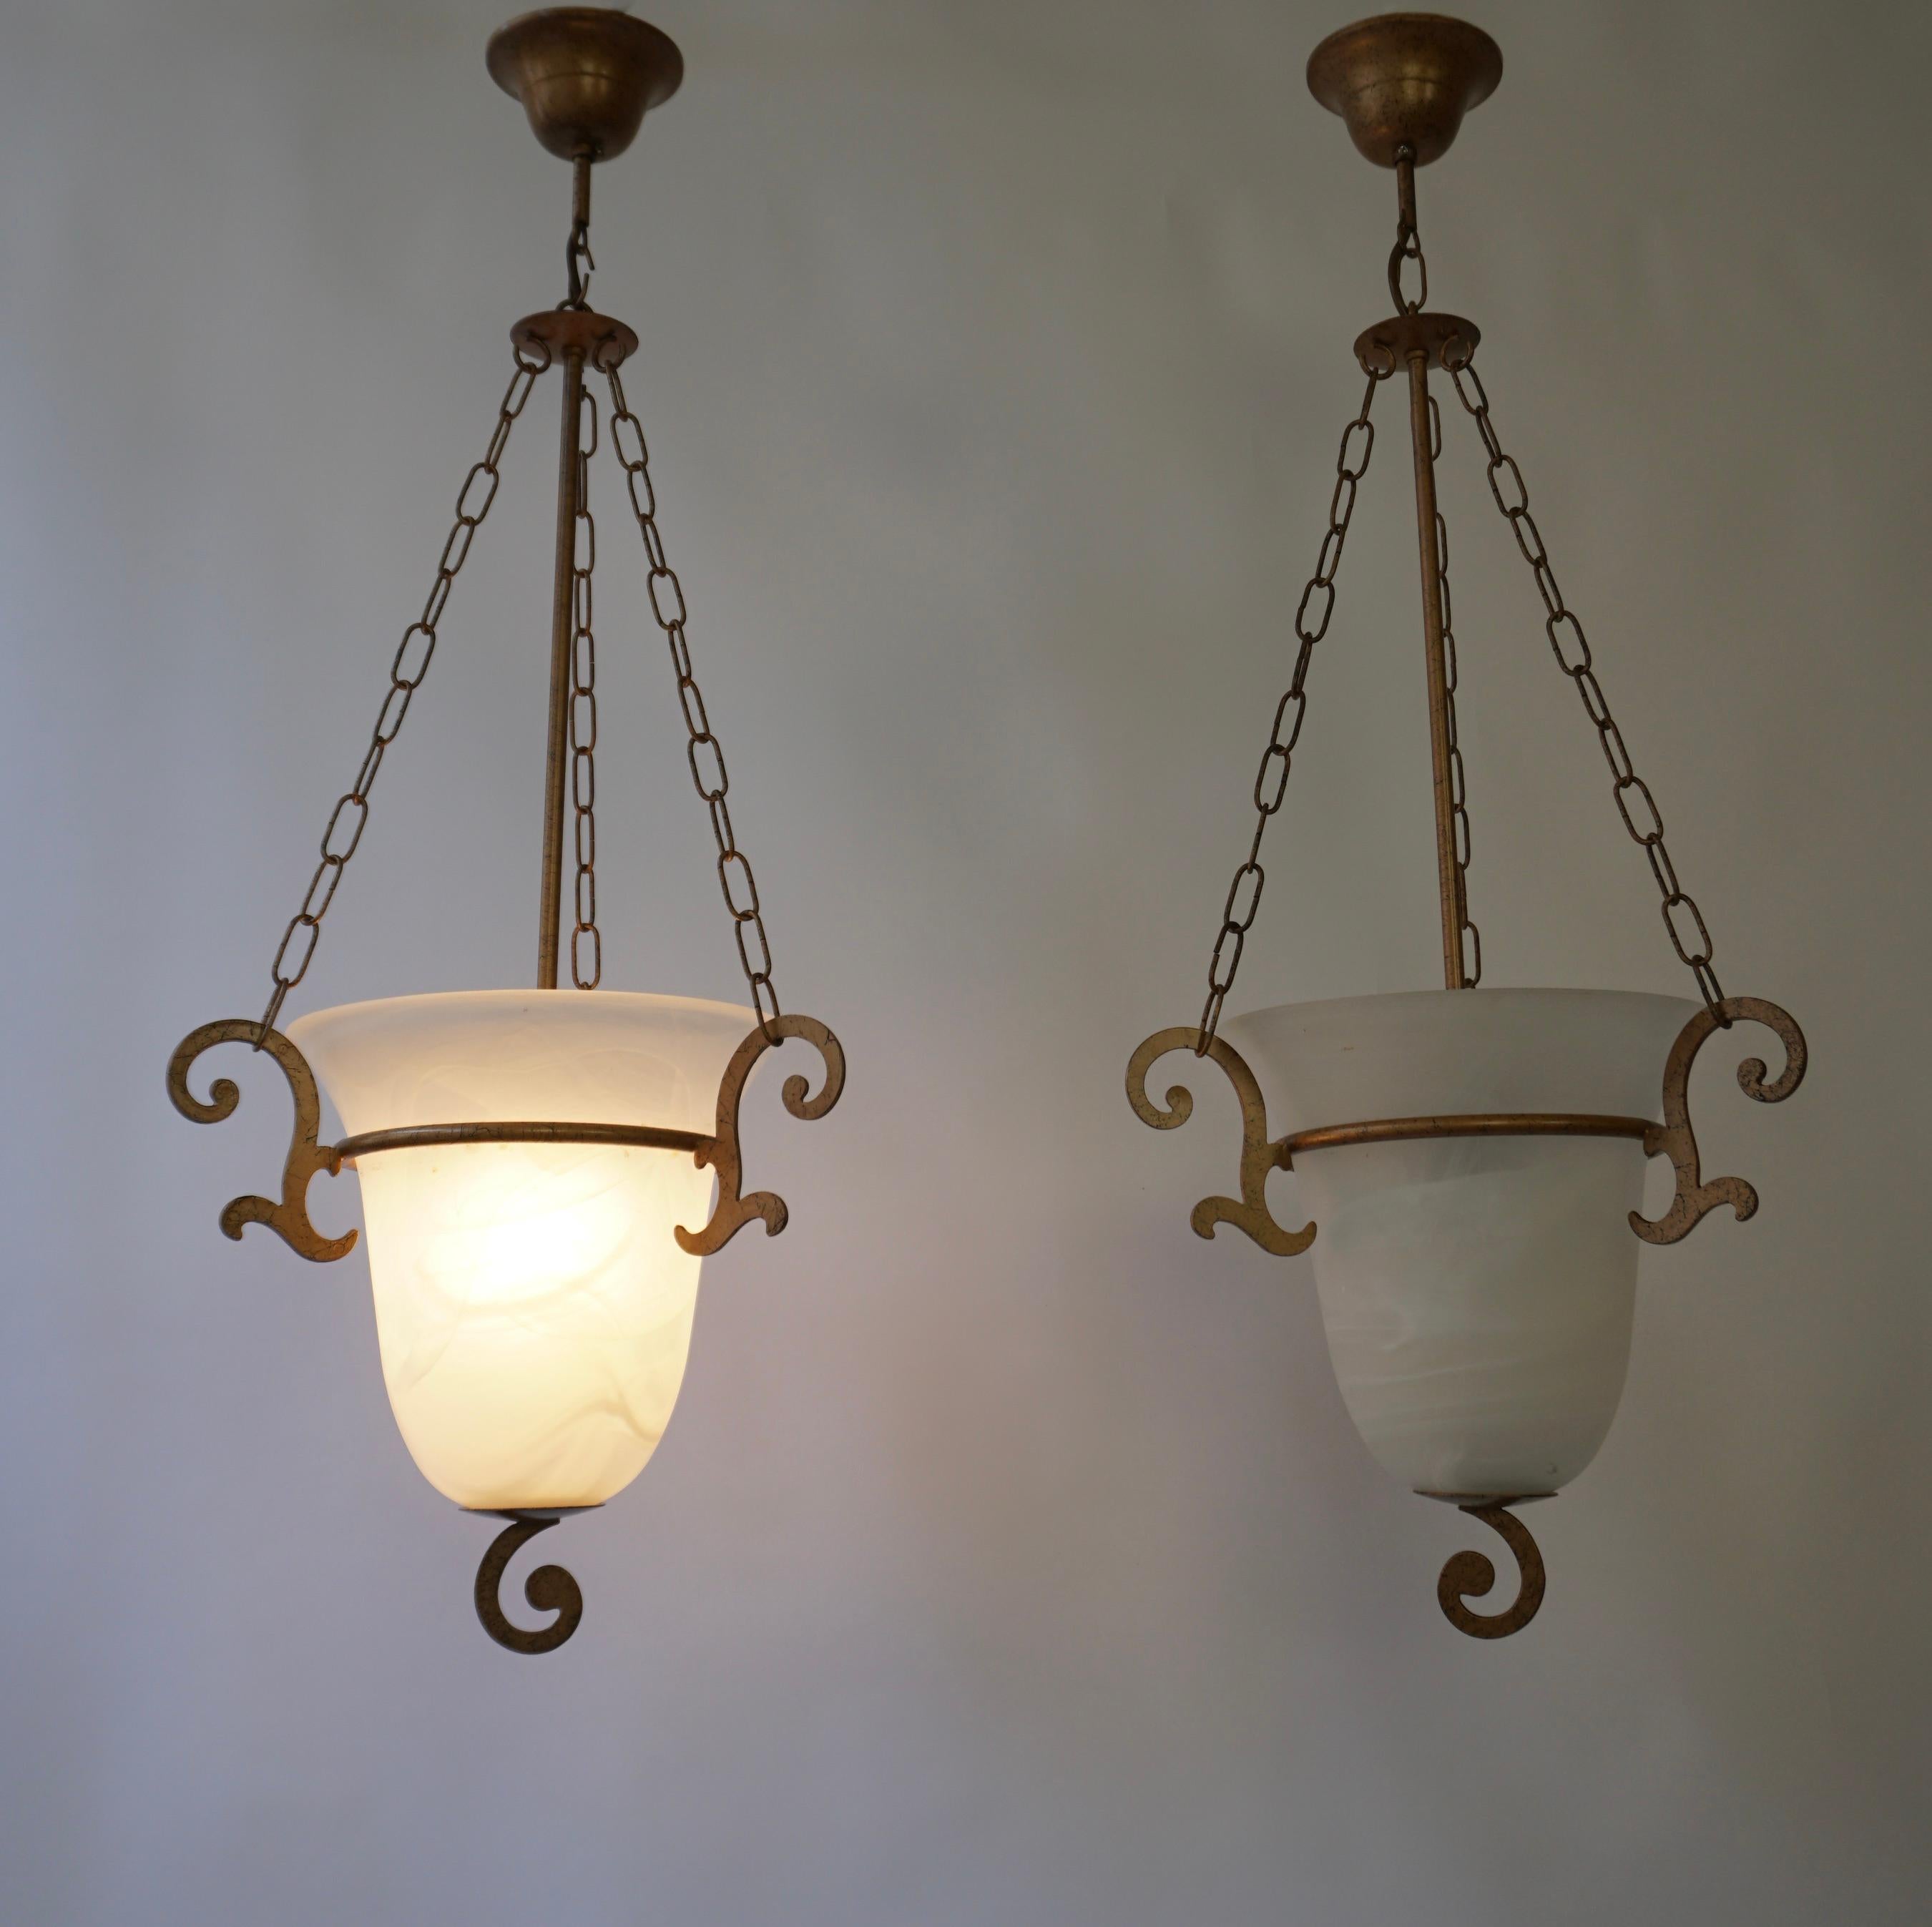 Two Greek style glass chandeliers, made in the 20th Century. The fixture is custom, and classically styled with an dark rubbed bronze gold finish. The glass bowl is 9.8″ diameter, 9.4″ deep.

The light has one socket for incandescent lamps with